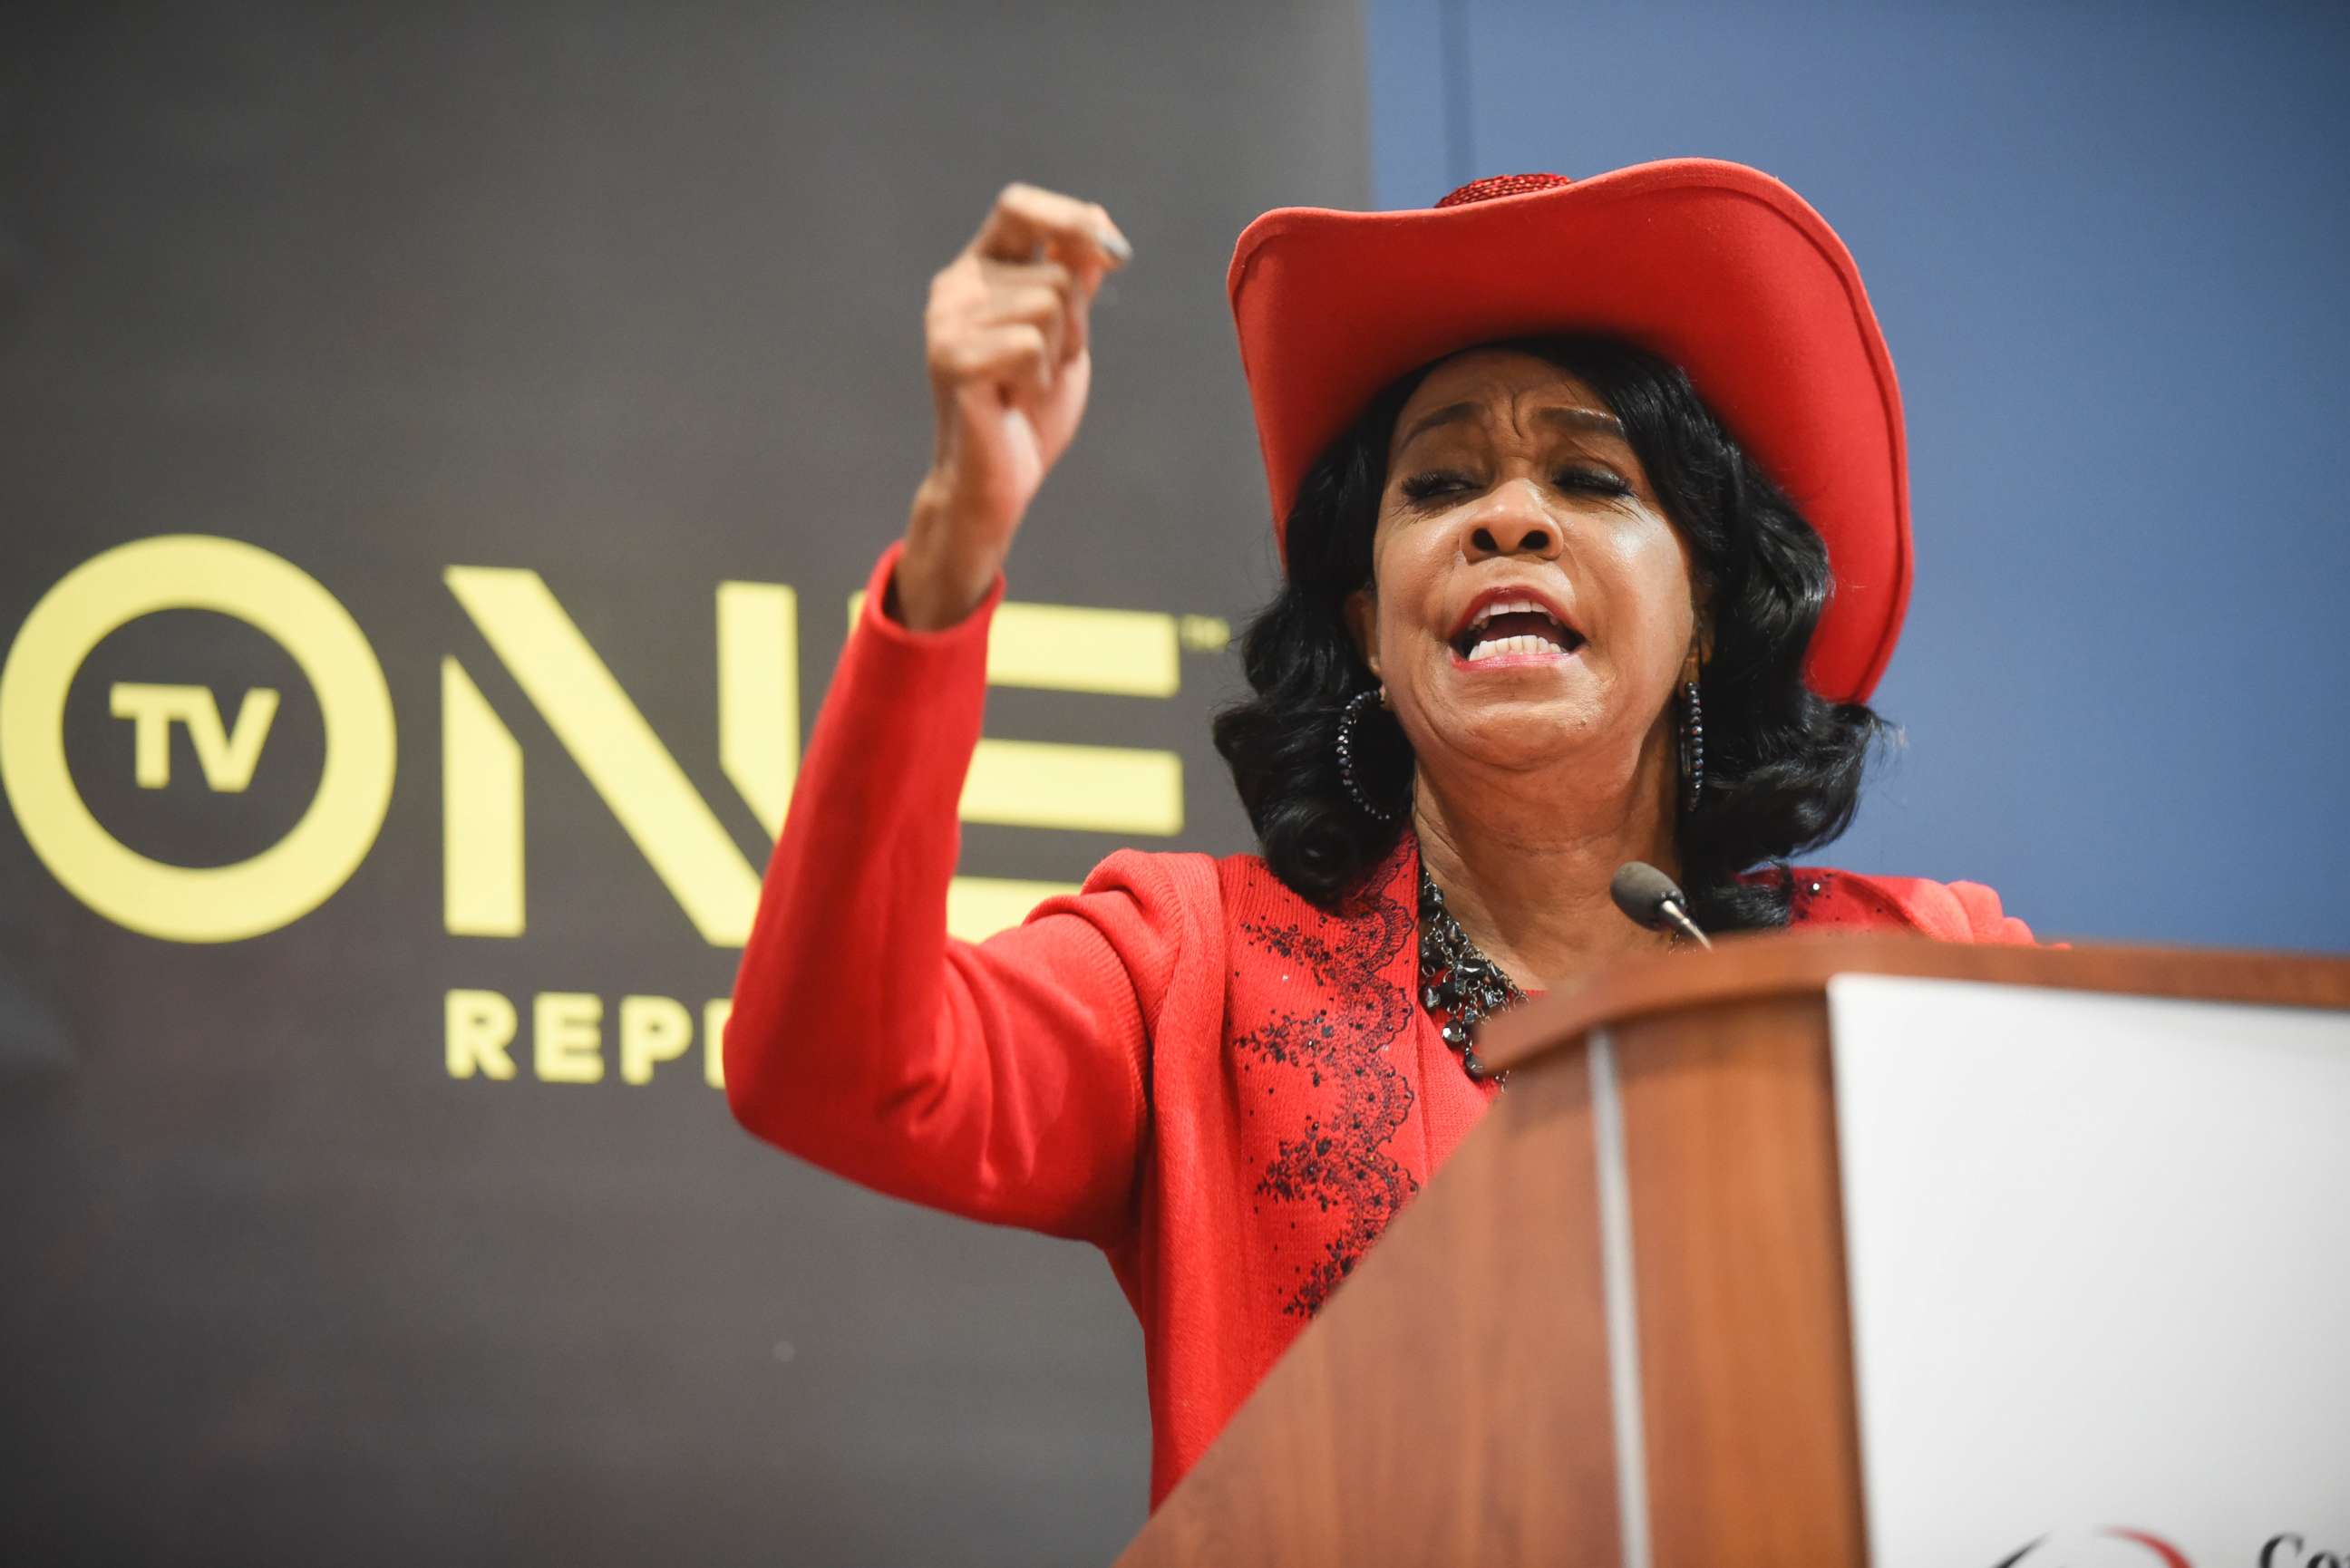 PHOTO: Rep. Frederica Wilson speaks during the TV One's Screening Bad Dad Rehab at the Walter E. Washington Convention Center, Sept. 16, 2016, in Washington, D.C.  